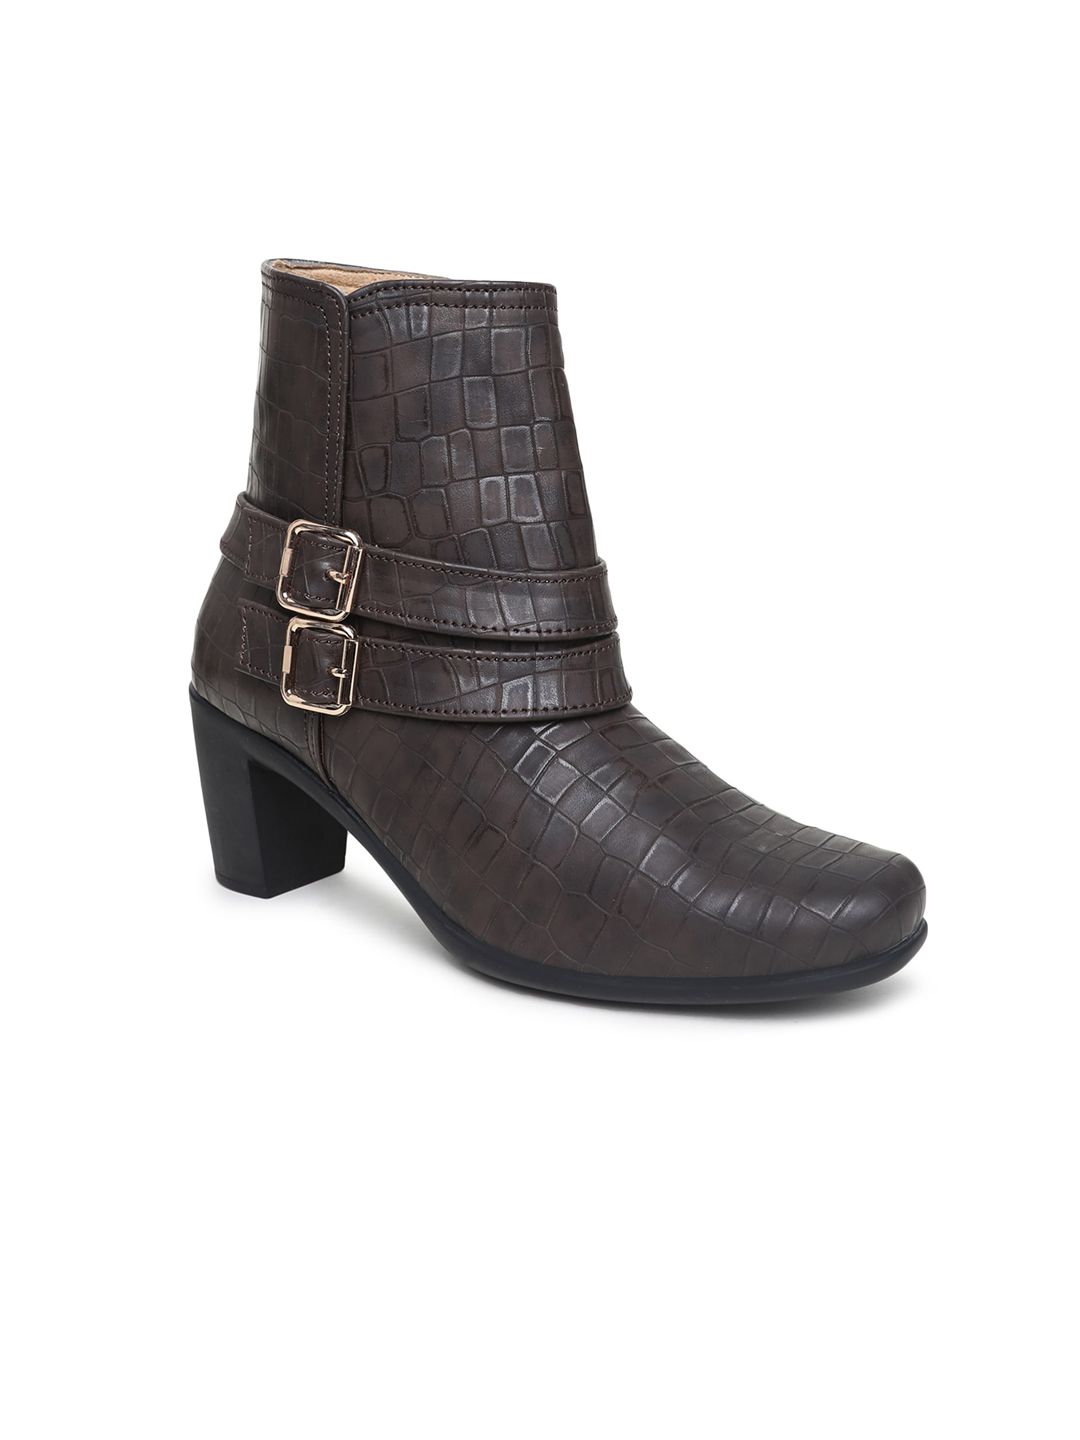 VALIOSAA Brown Textured Block Heeled Boots with Buckles Price in India